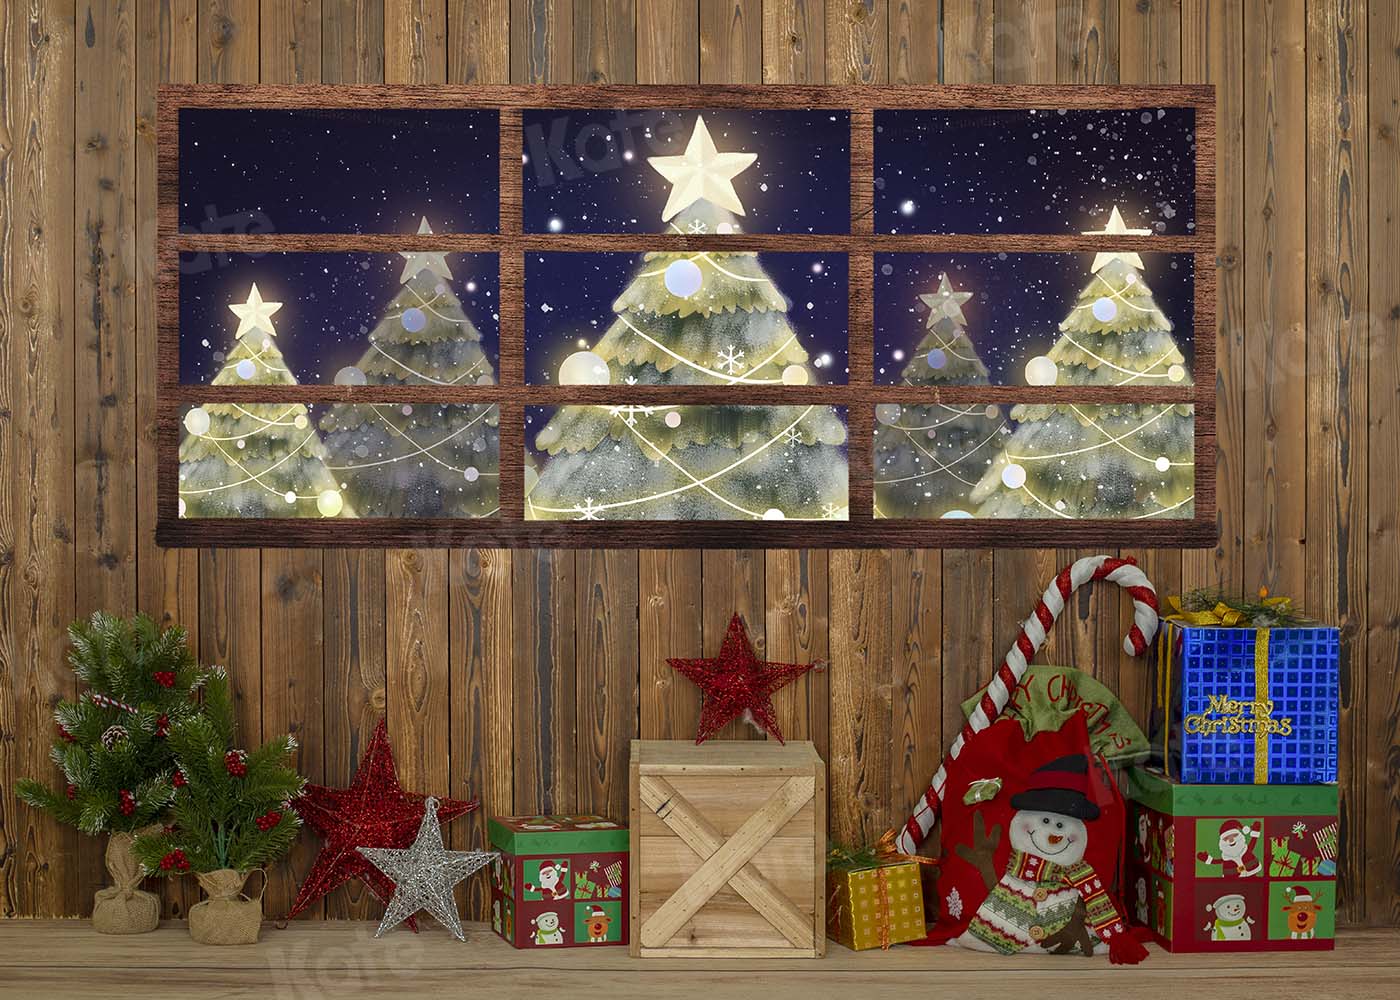 Kate Christmas Wooden House Star Night Backdrop Designed by Emetselch